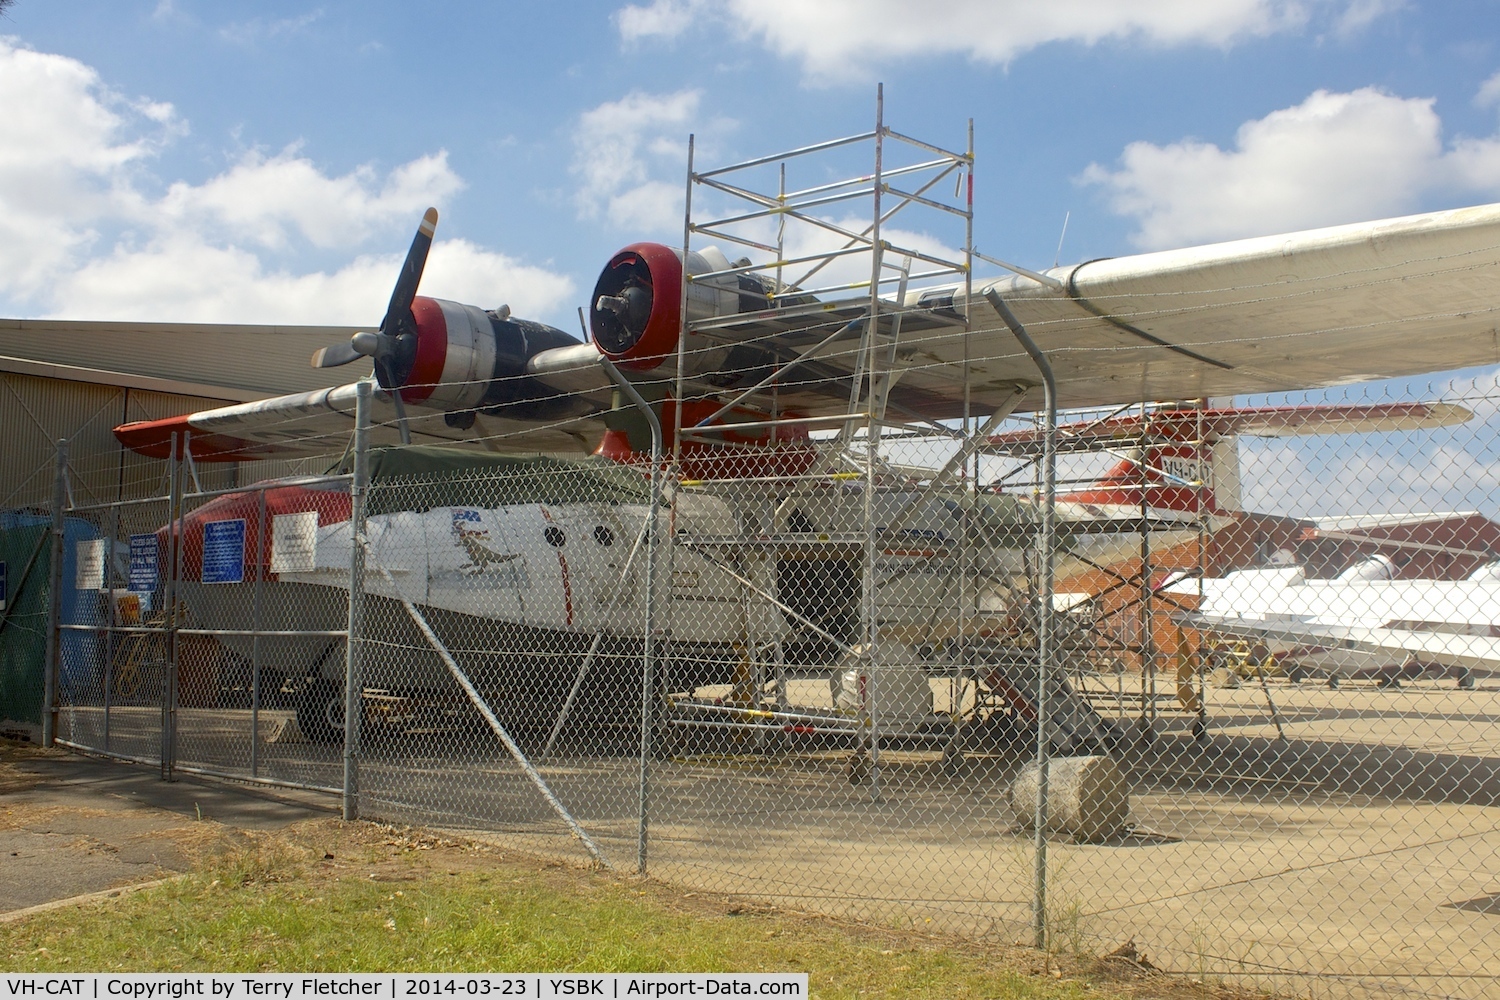 VH-CAT, 1945 Consolidated Vultee PBY-6A C/N 46665, 1945 Consolidated Vultee PBY-6A, c/n: 46665 awaiting restoration at Bankstown NSW